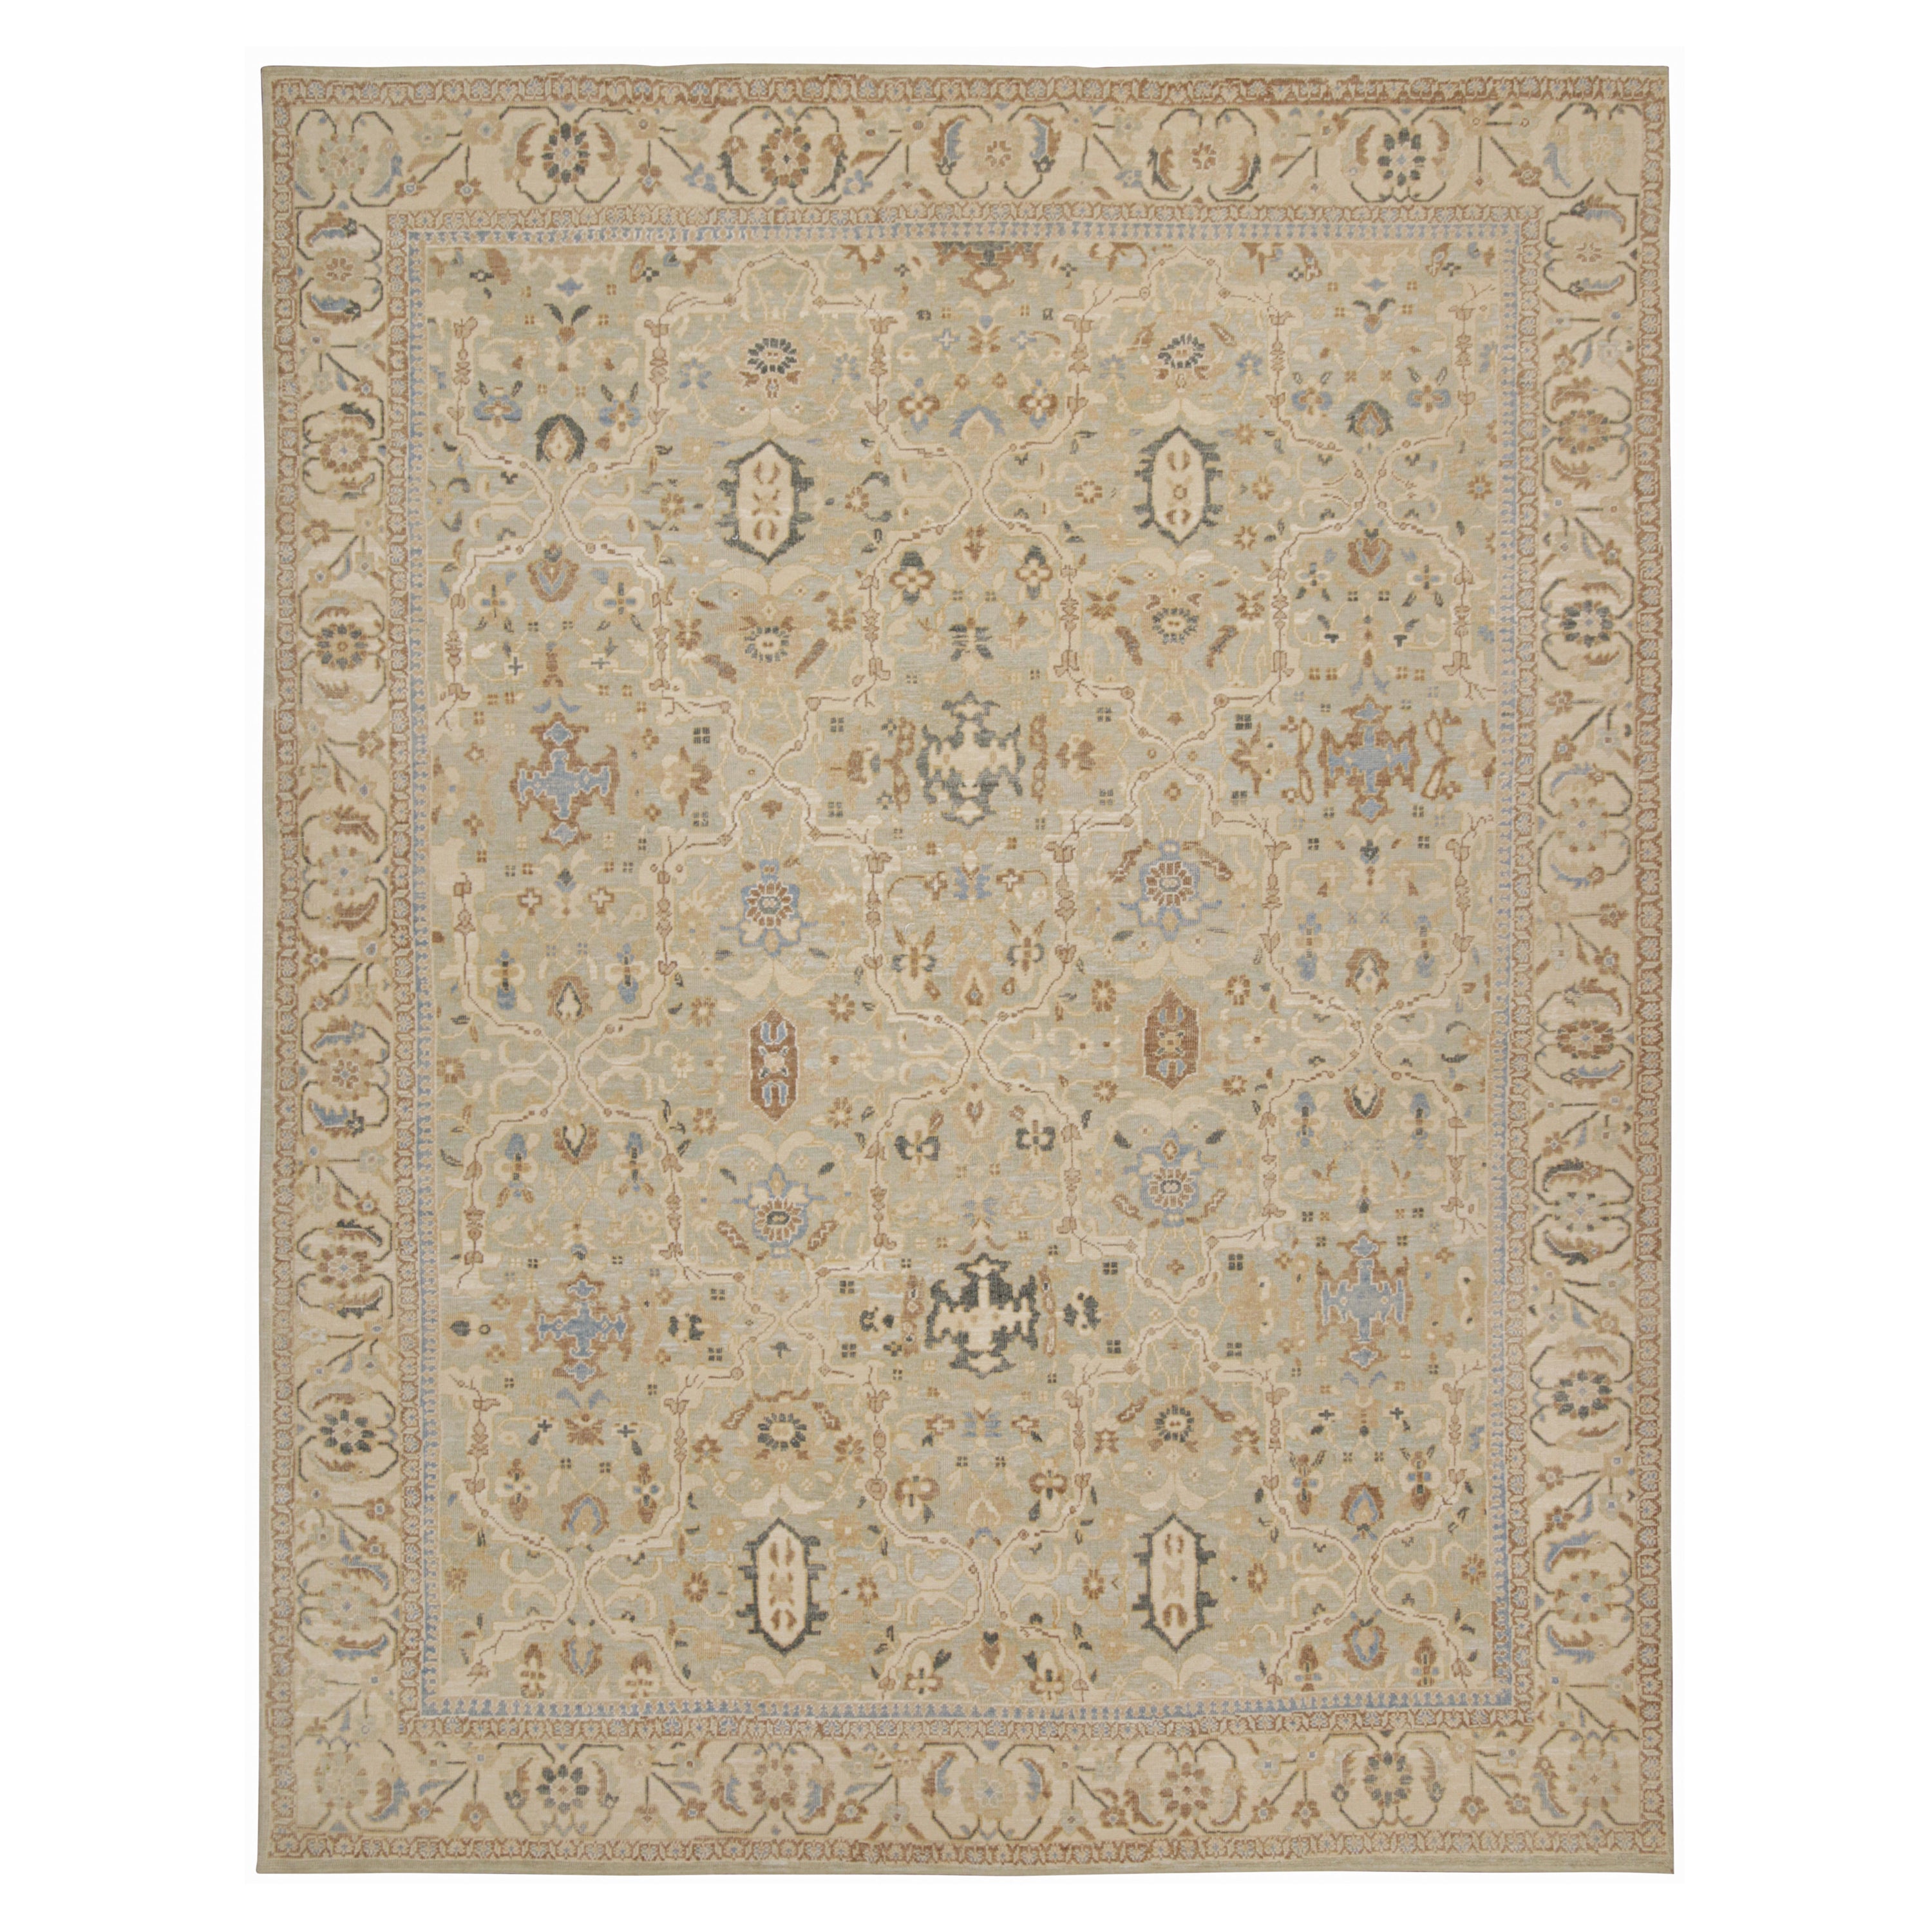 Rug & Kilim’s Oushak Style Rug in Blue and Beige-Brown Floral Patterns For Sale